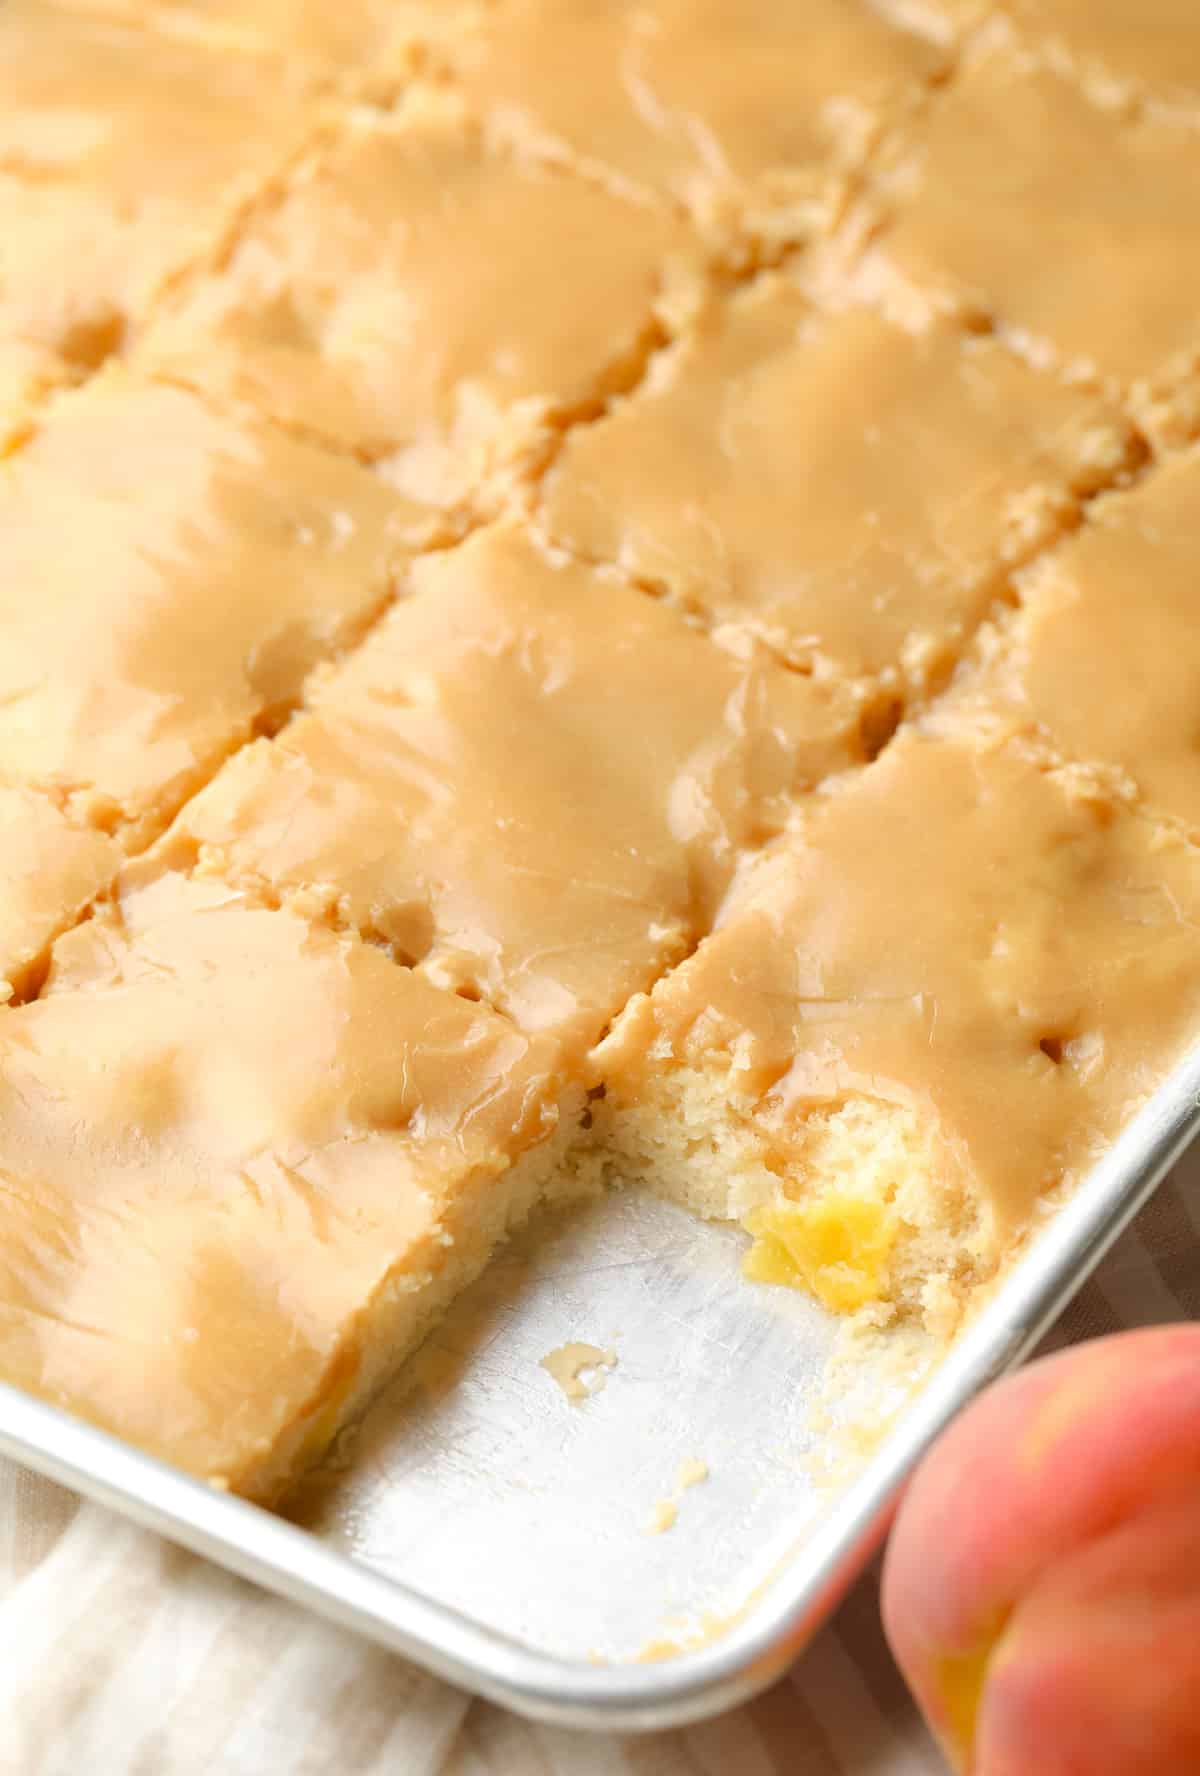 sheet pan with sliced peach cake with brown sugar frosting